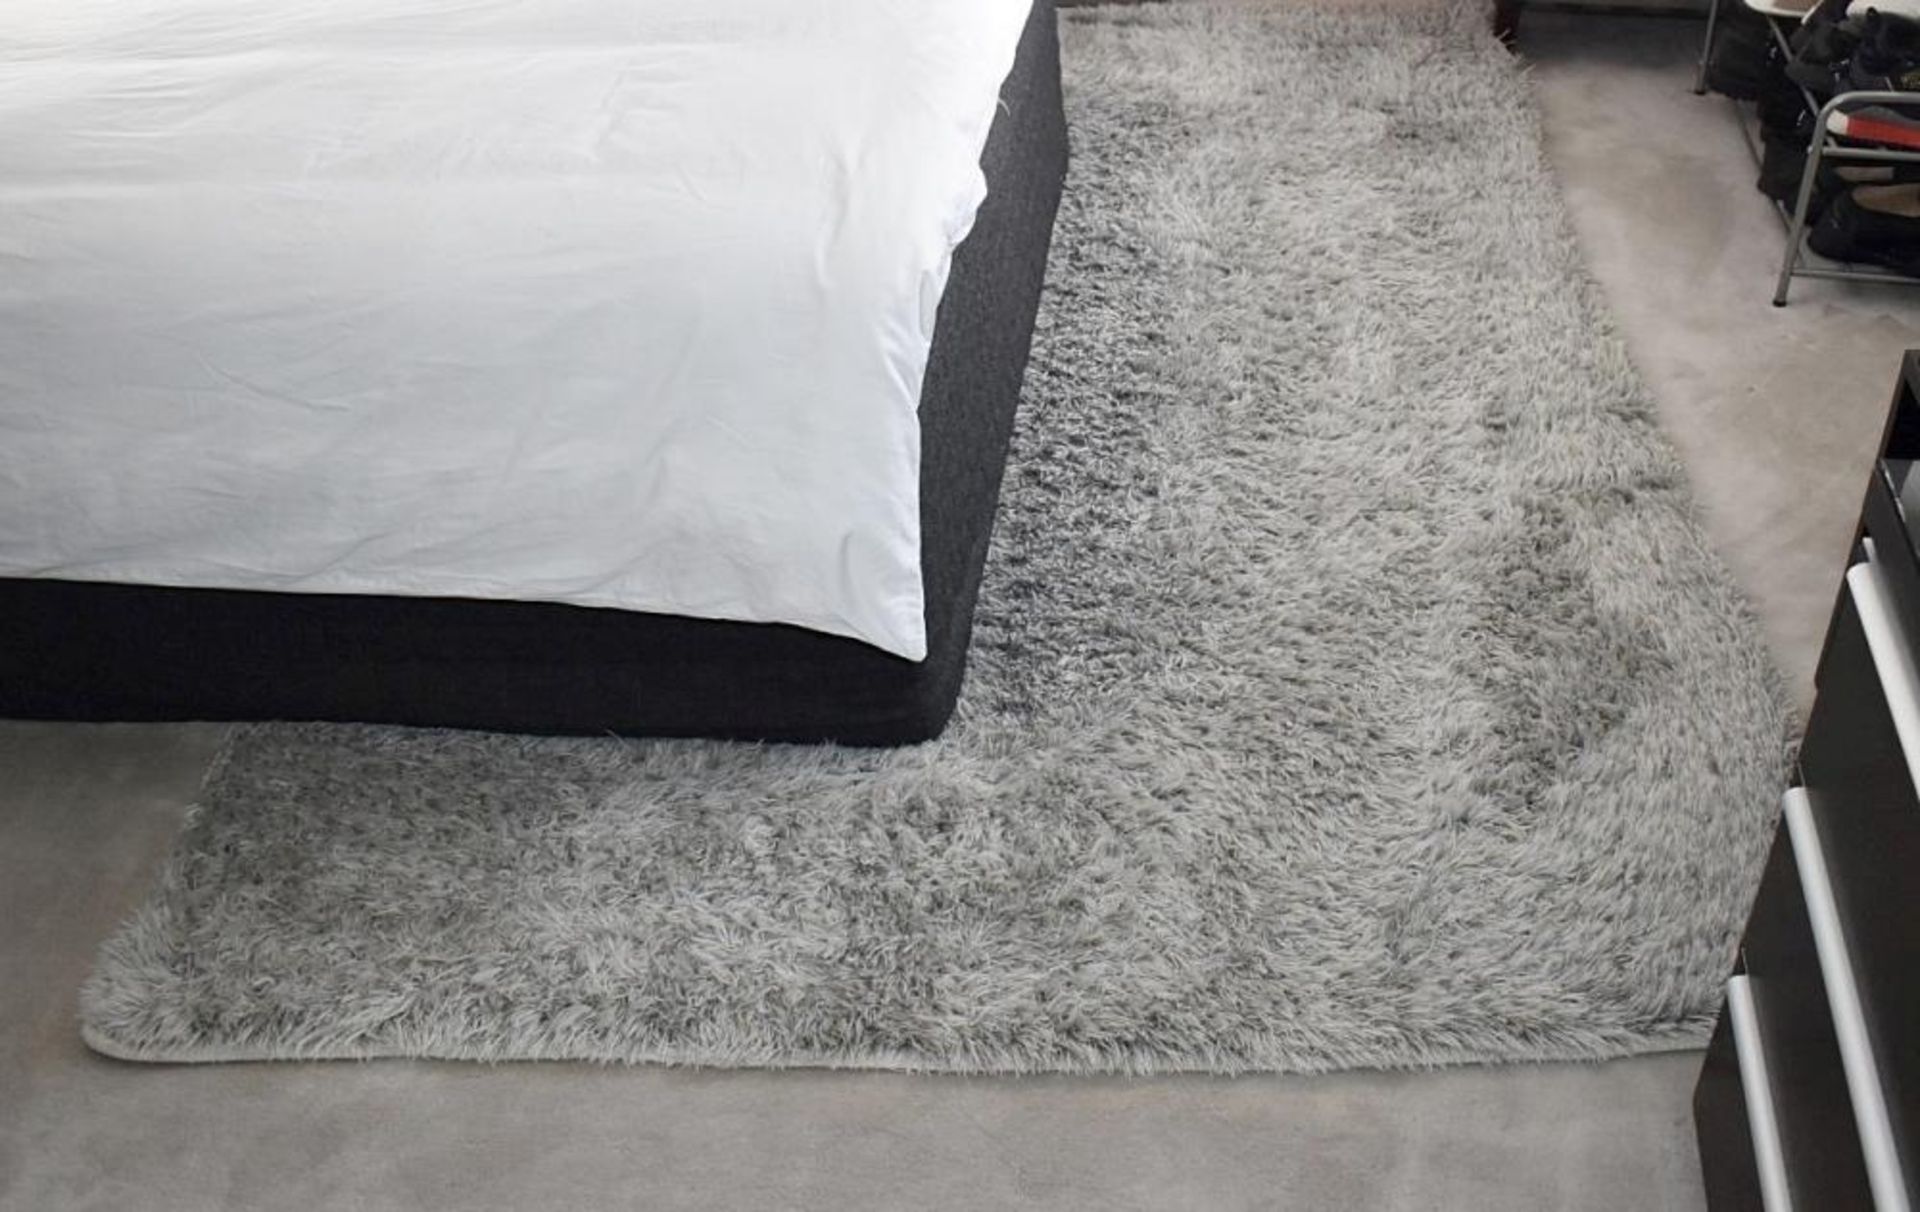 1 x High Quality Bedroom Rug In Grey - Dimensions (approx): 250 x 175cm - Ref: ABR073 / OBR - CL491 - Image 3 of 3